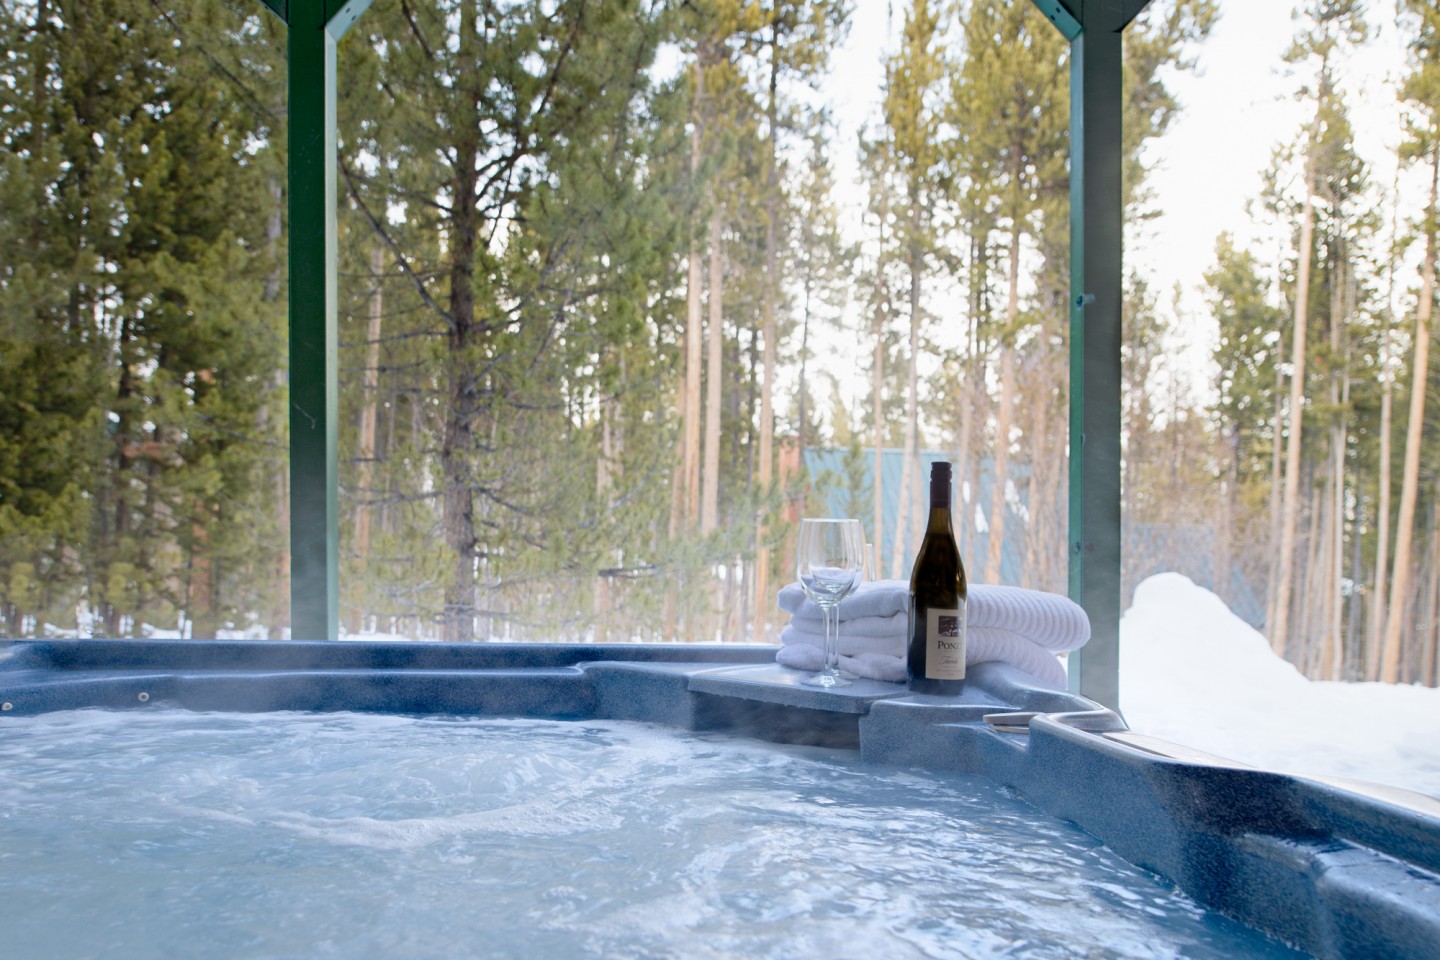 Private hot tub with a view to the surrounding pines ... your seat in the hot tub awaits